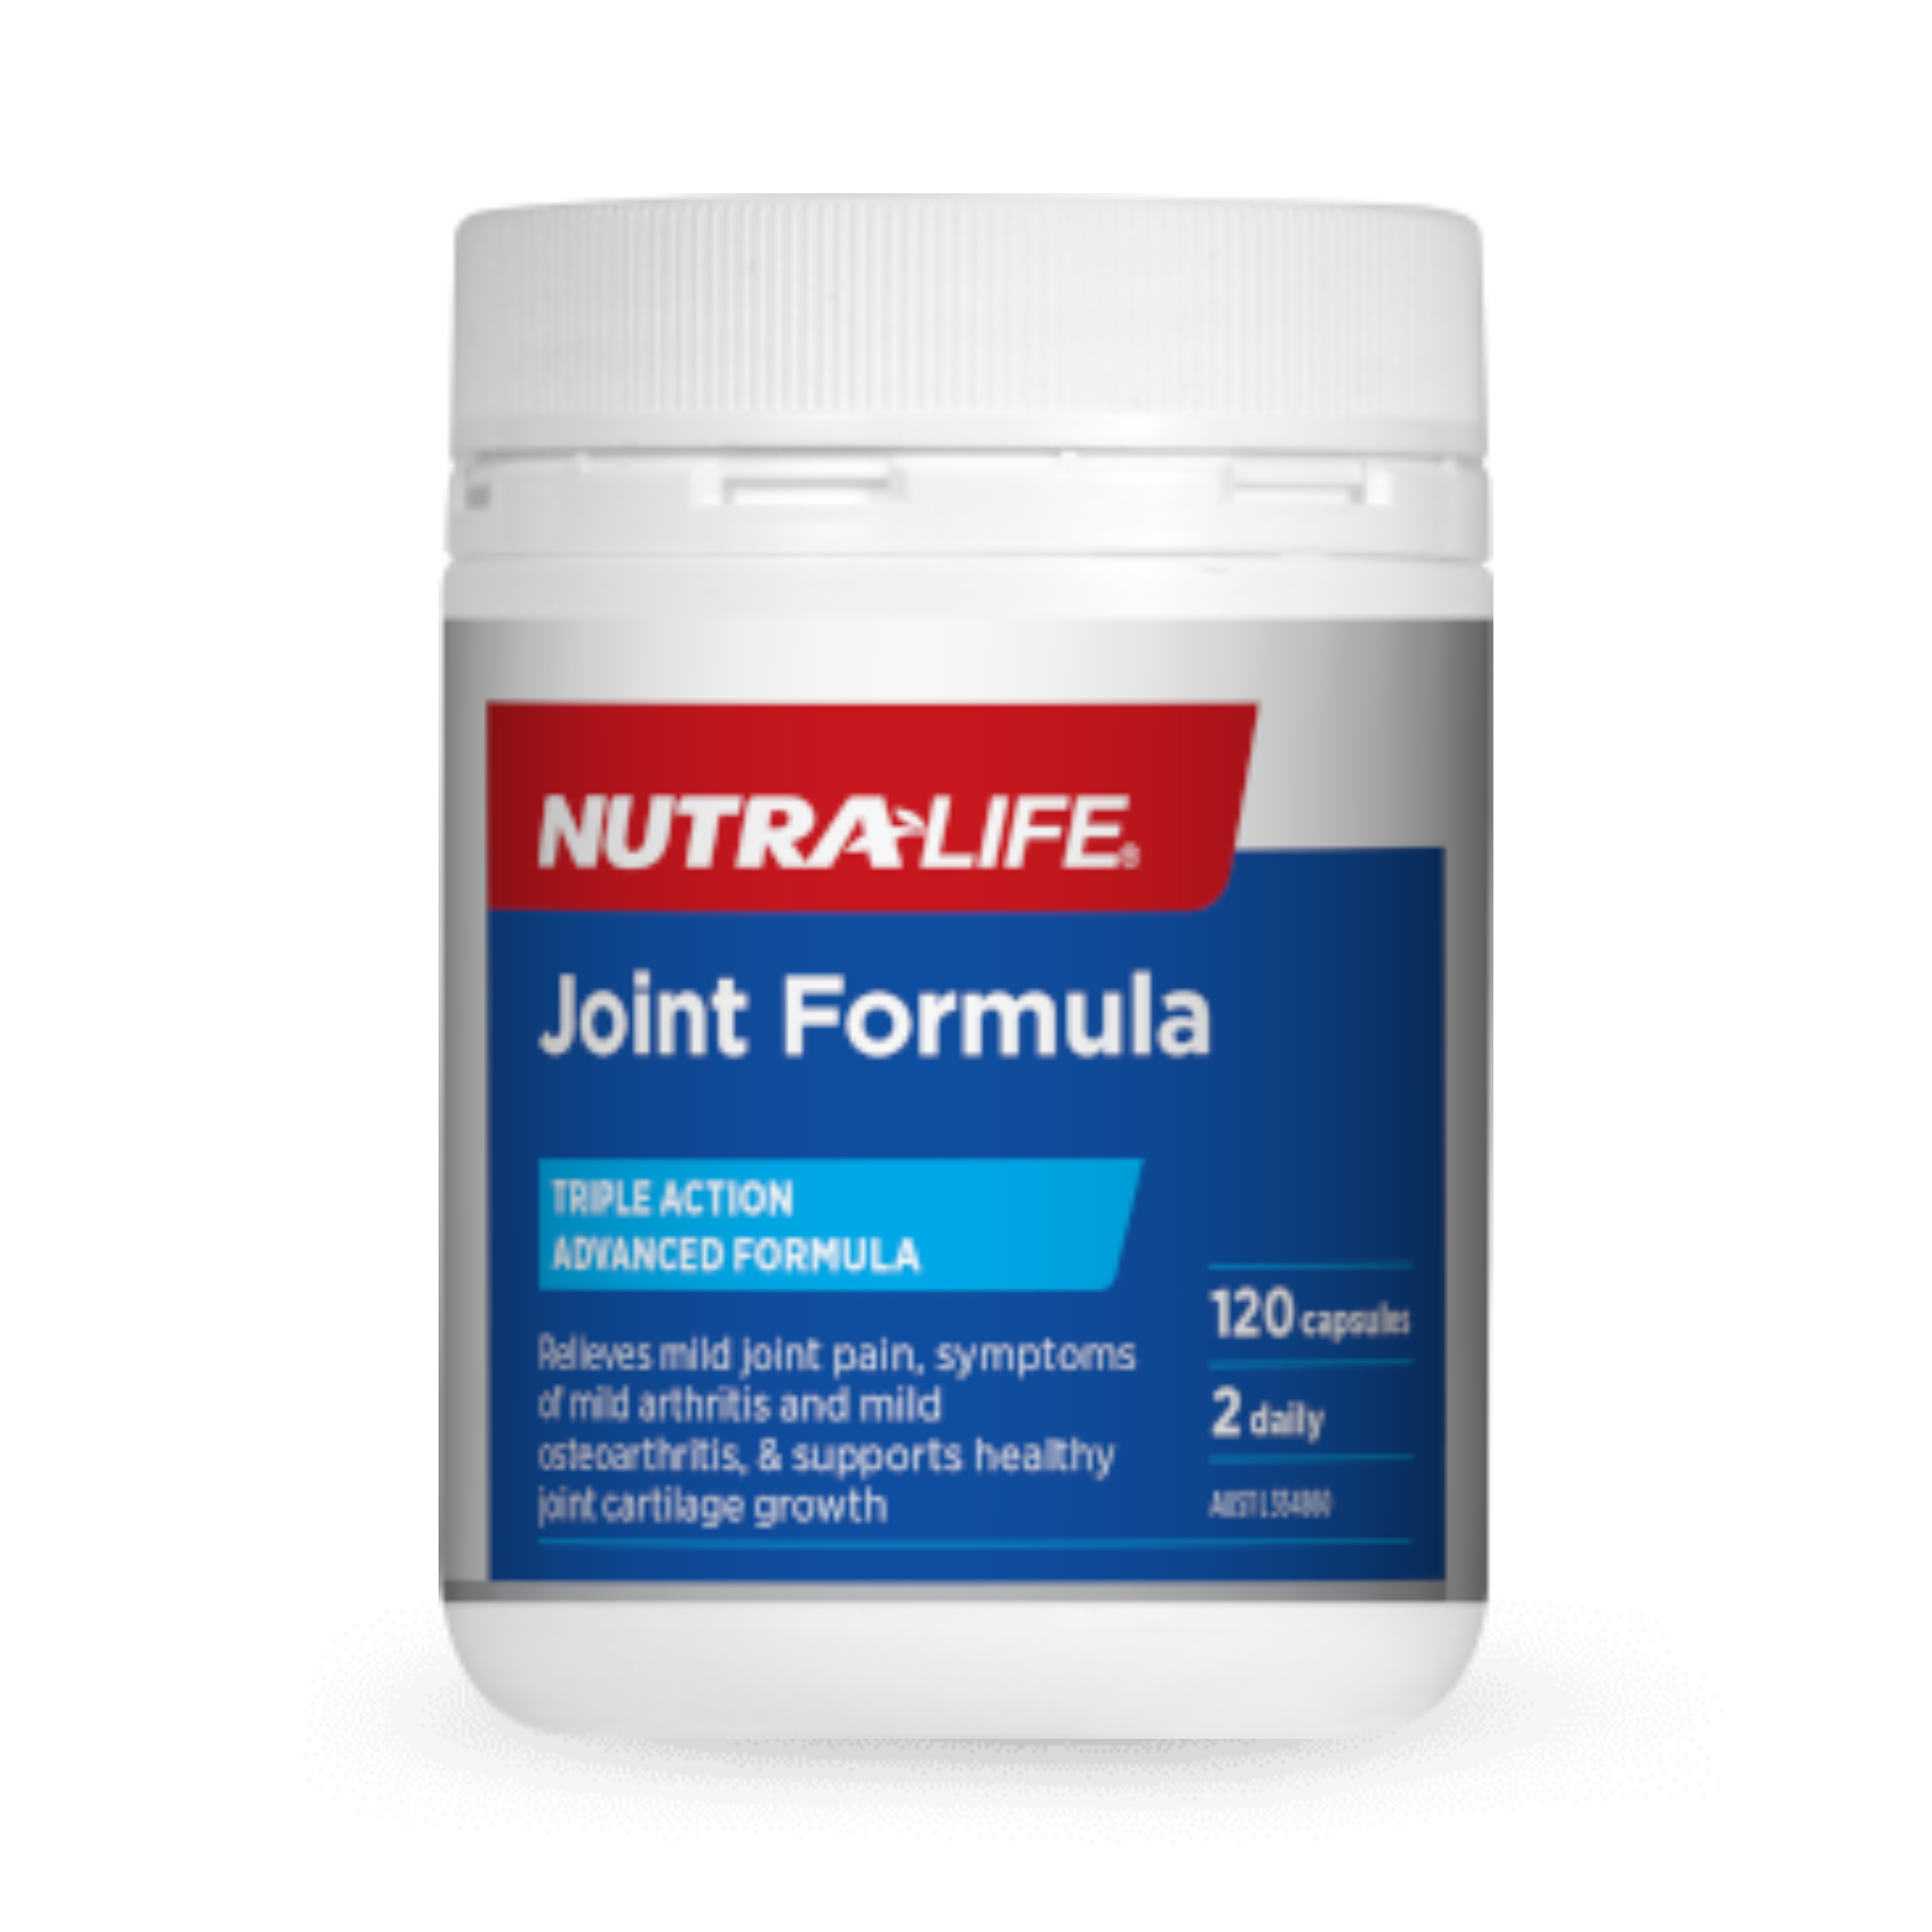 Nutralife Joint Formula 120 Capsules